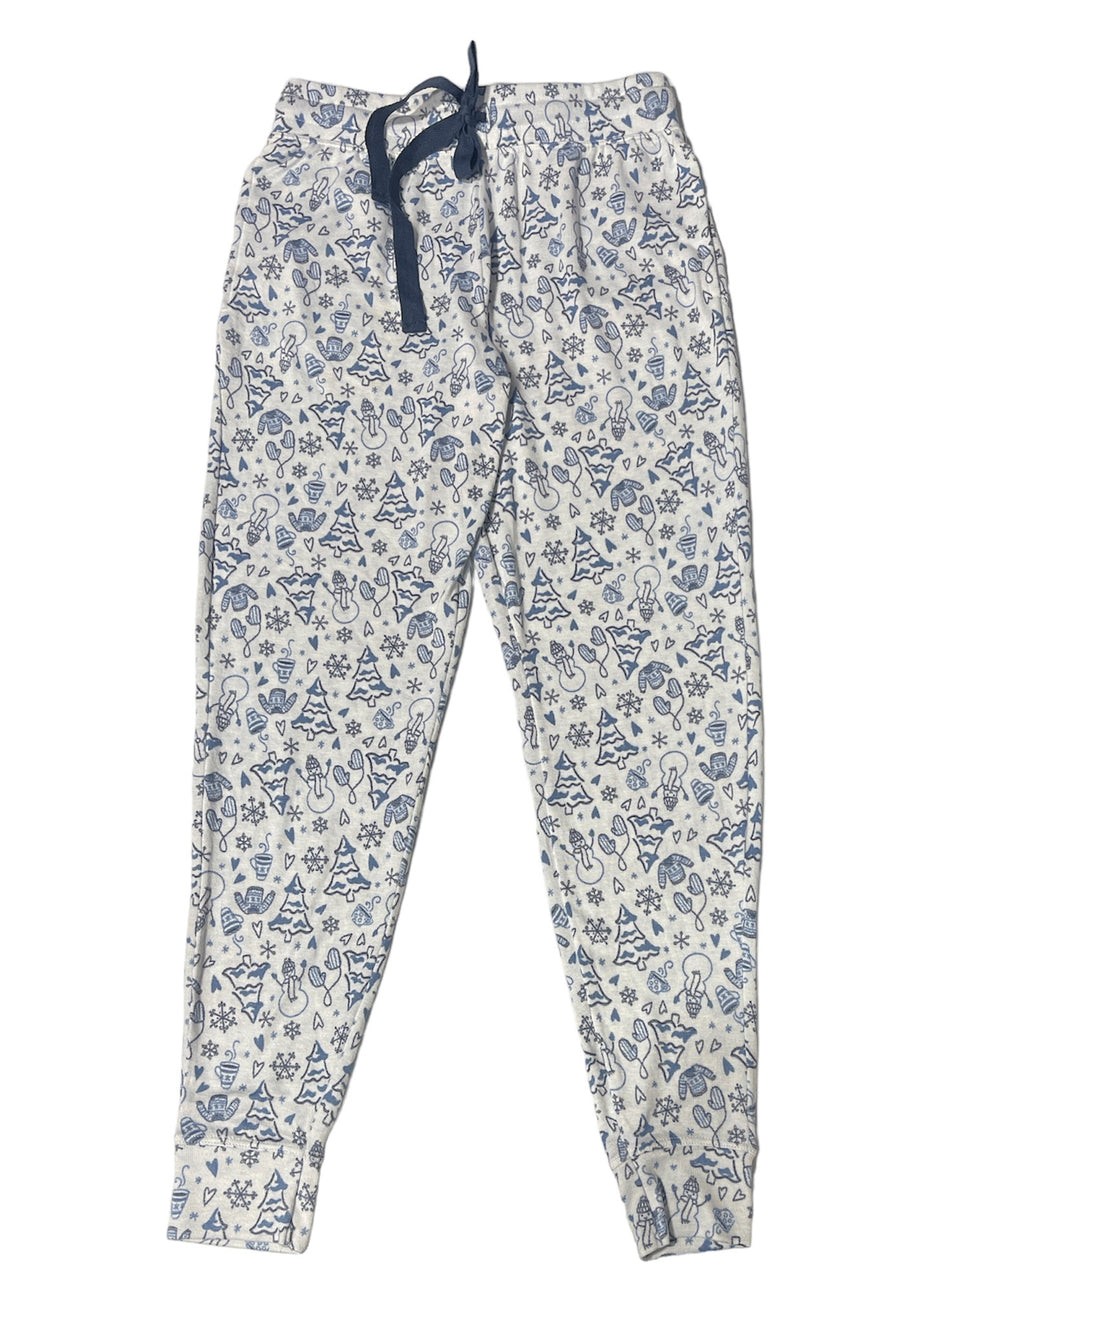 allbrand365 Womens Printed Pajama Pants Only, 1 Piece